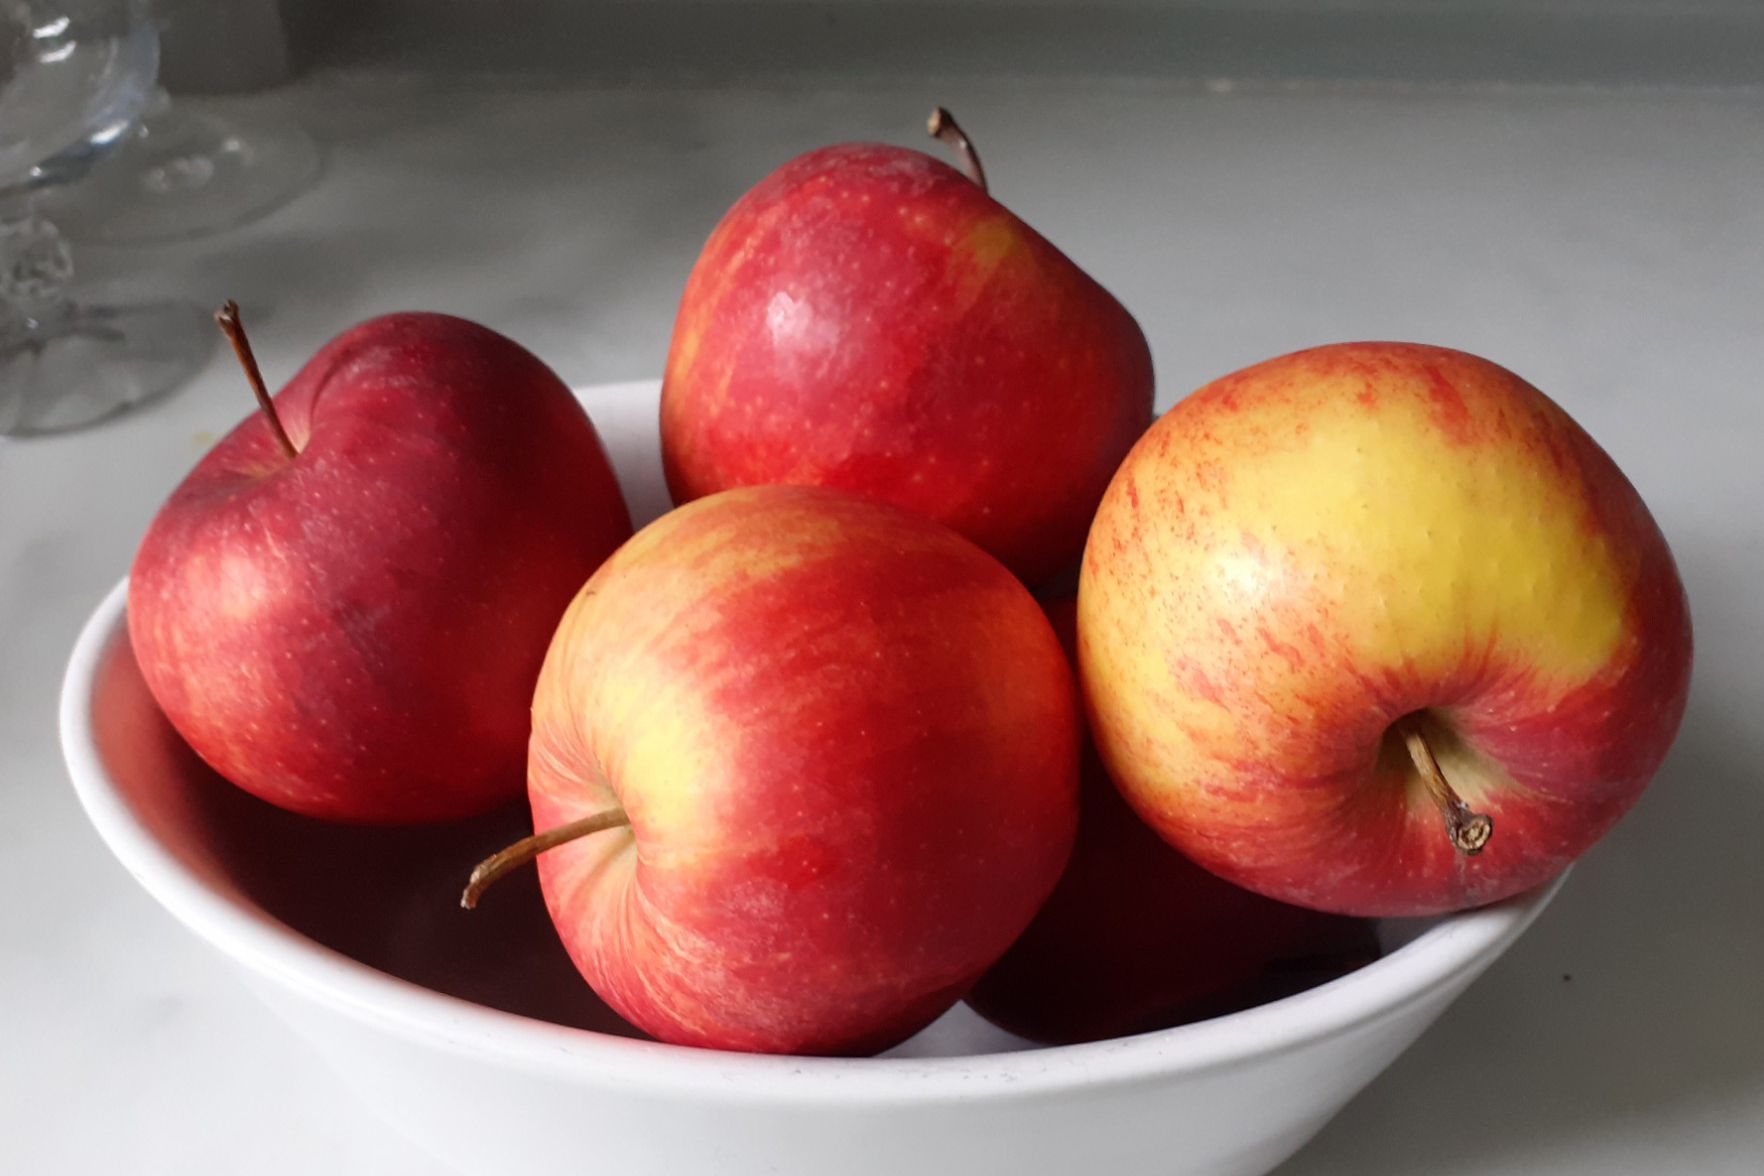 Four rosy red, tinged with yellow, apples in a small white bowl - on white worktop